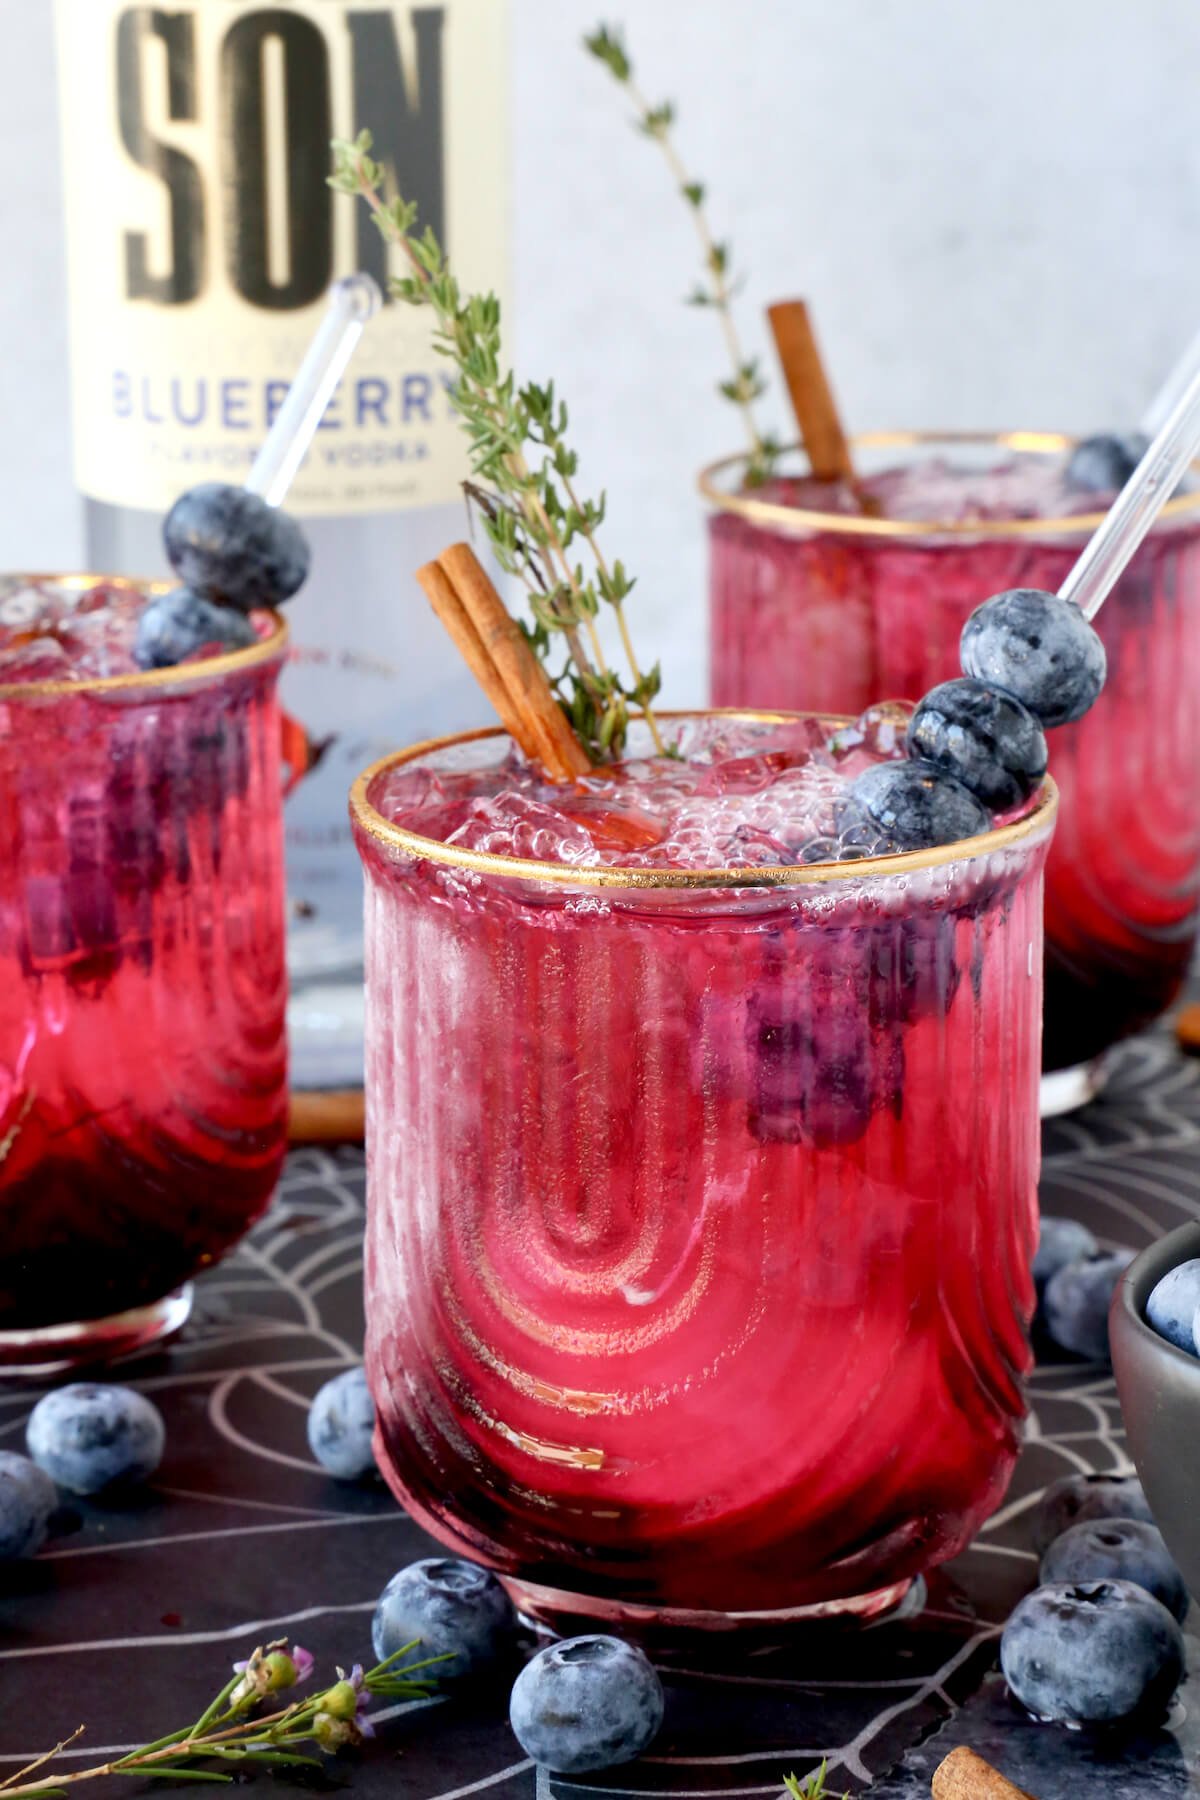 Three glasses filled with a pink drink with blueberries on top and smoke coming out.